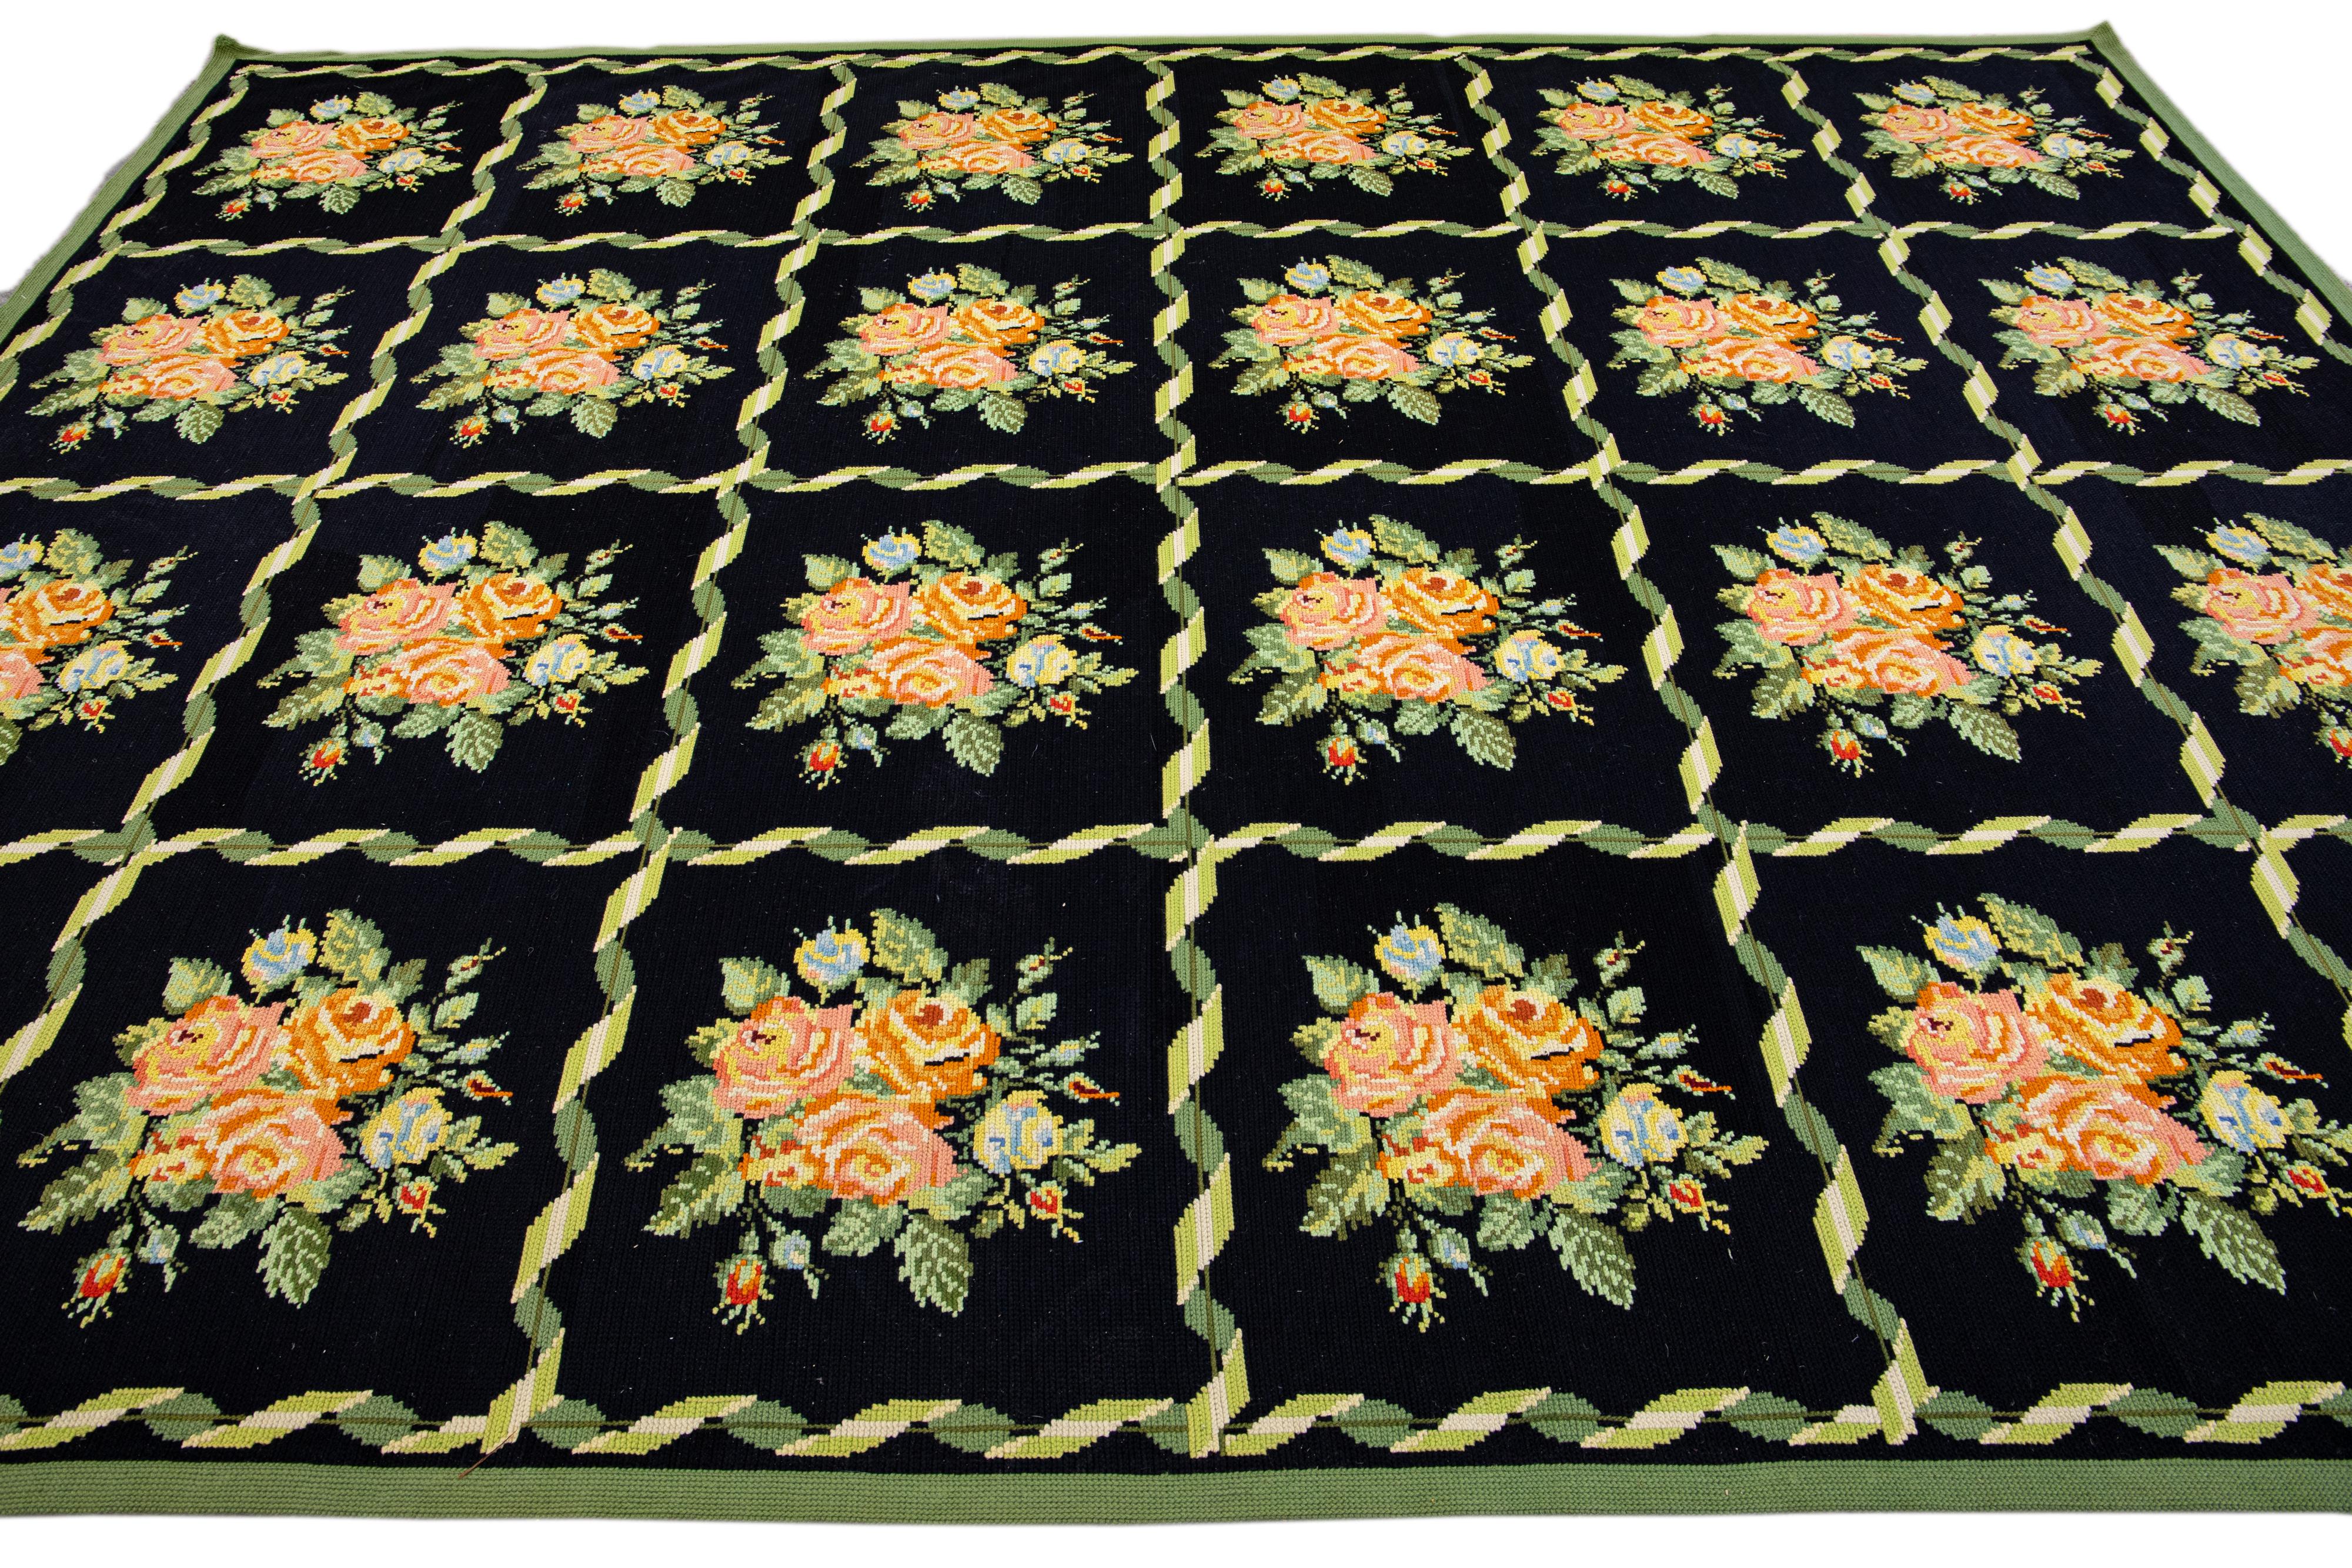 Vintage English Needlepoint Handmade Floral Black Wool Rug In Excellent Condition For Sale In Norwalk, CT